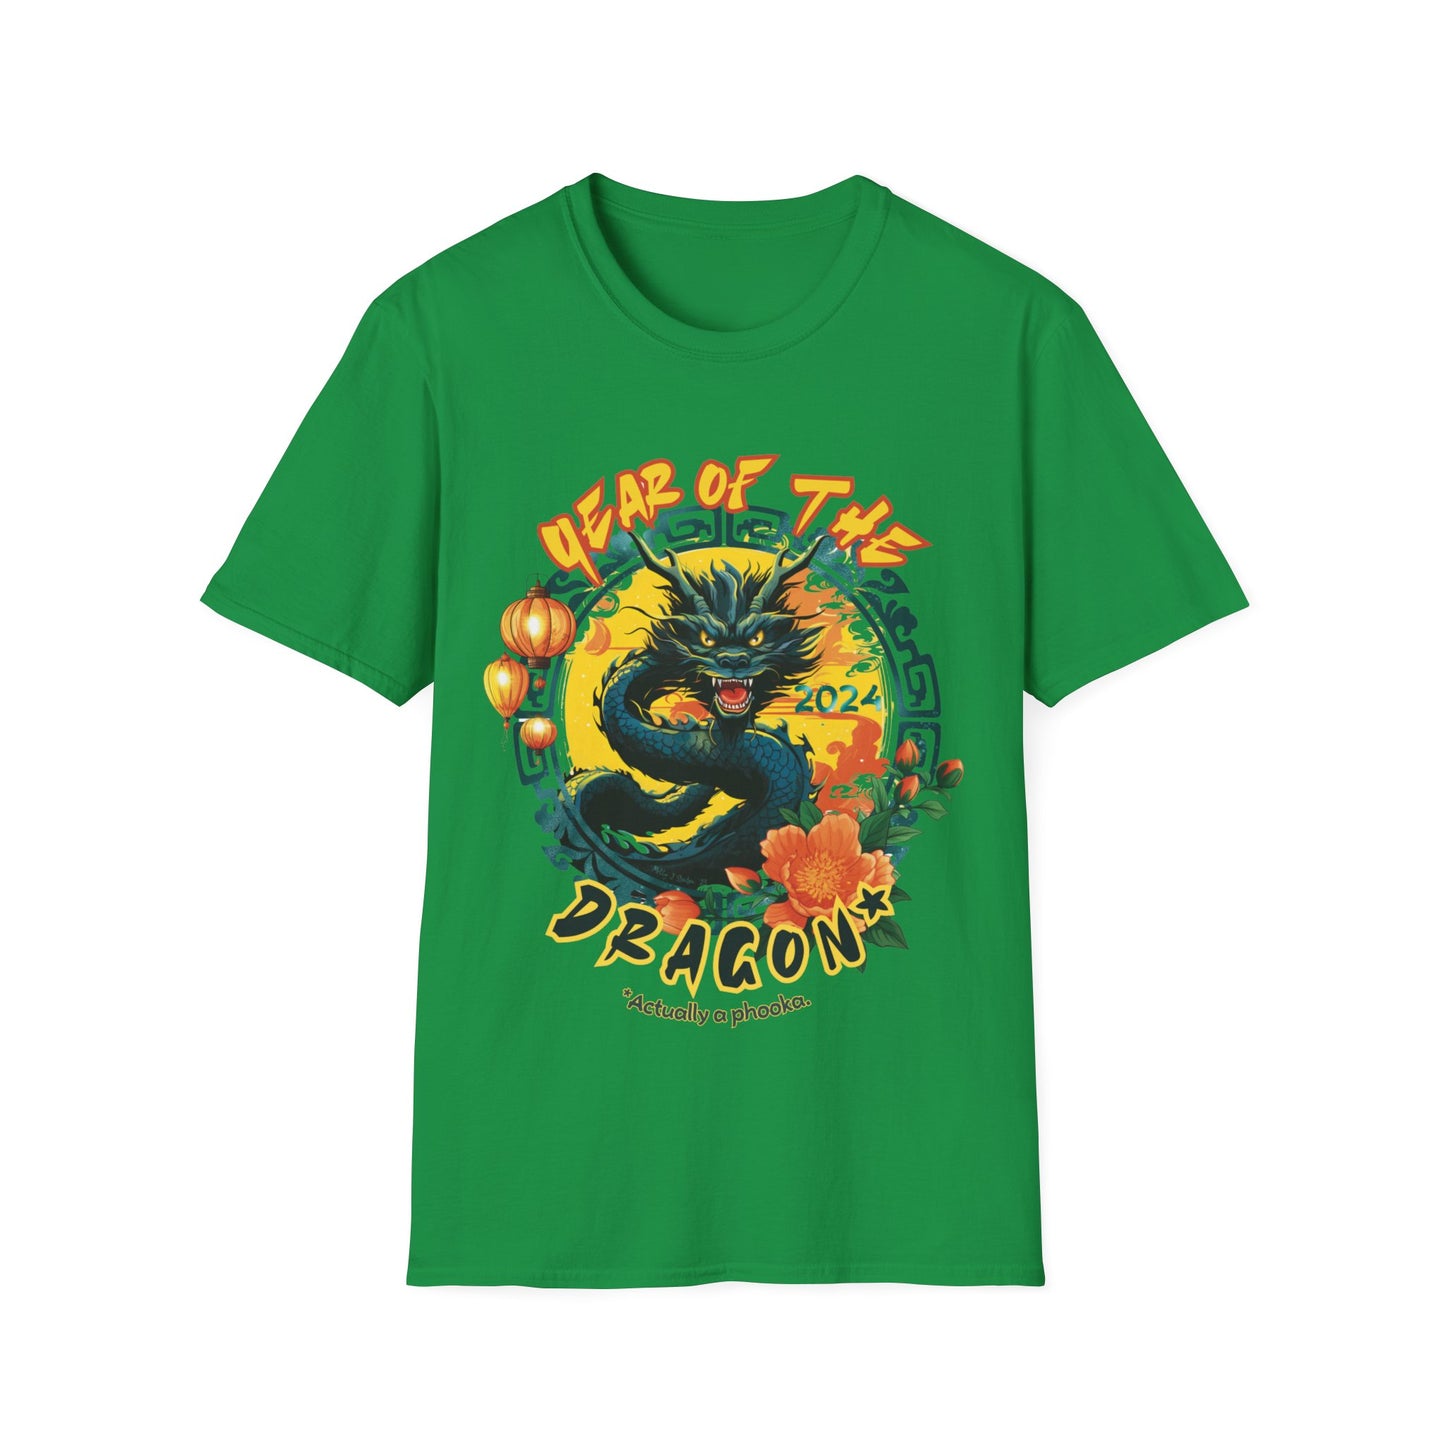 Year of the "Dragon" Unisex T-Shirt